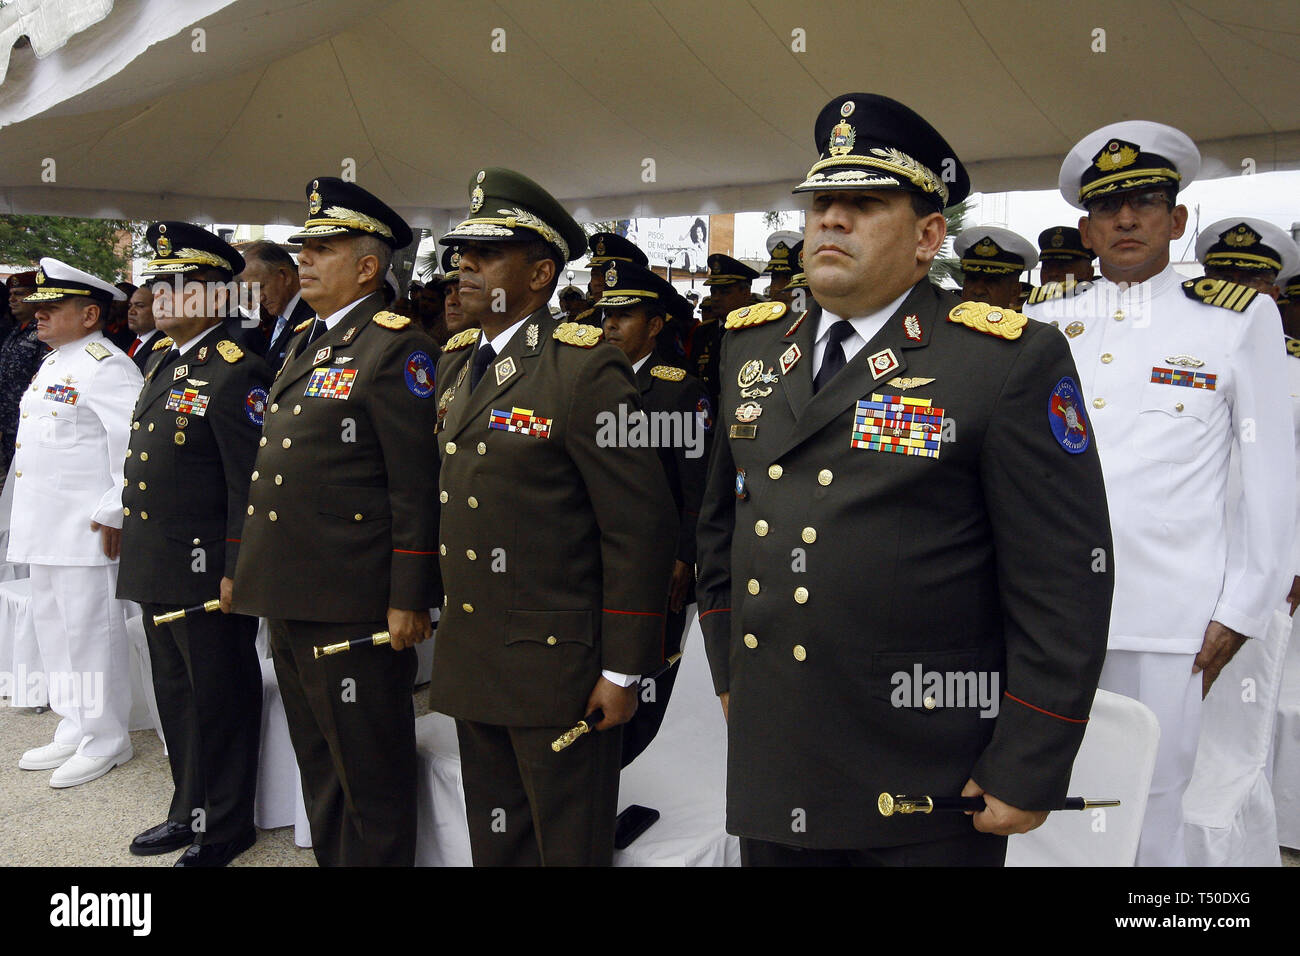 Valencia, Carabobo, Venezuela. 19th Apr, 2019. April 19, 2019. Members of the military high command in the Carabobo state, participate in the official acts of commemoration of the 209 years of the signing of the act of independence of Venezuela for the then Spanish domain. The events took place in the Bolivar square, in the city of Valencia, carabobo state. Photo: Juan Carlos Hernandez Credit: Juan Carlos Hernandez/ZUMA Wire/Alamy Live News Stock Photo